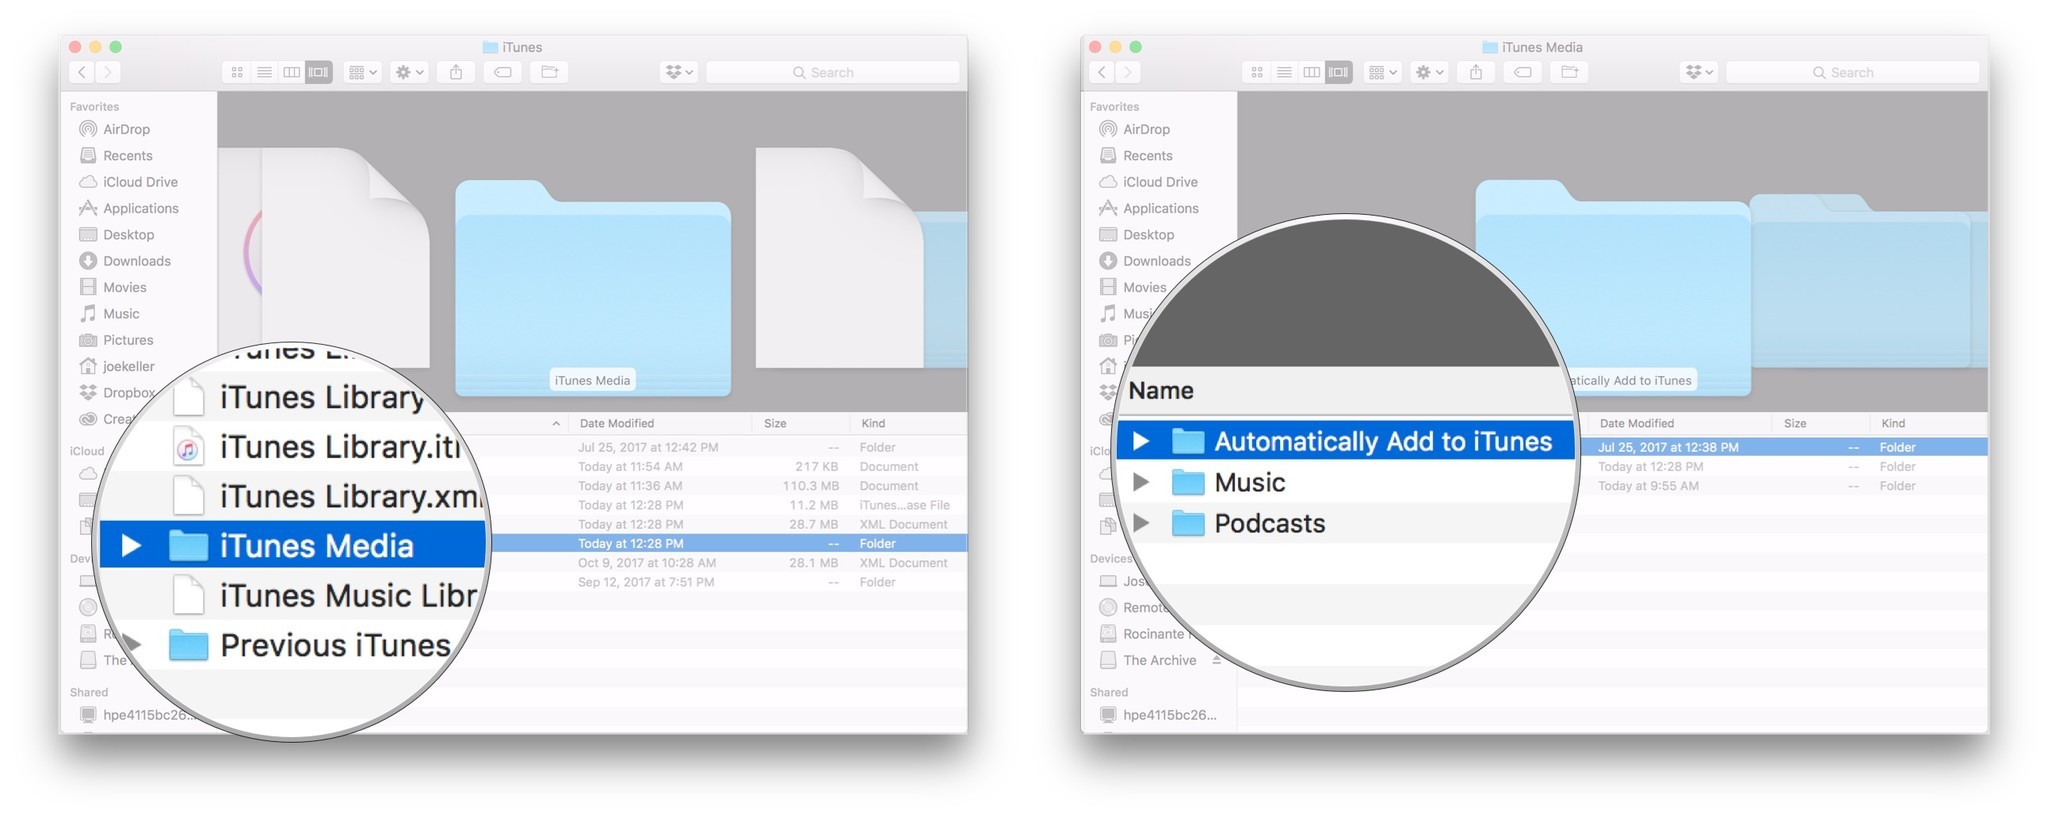 Double-click iTunes Media then Automatically Add to iTunes